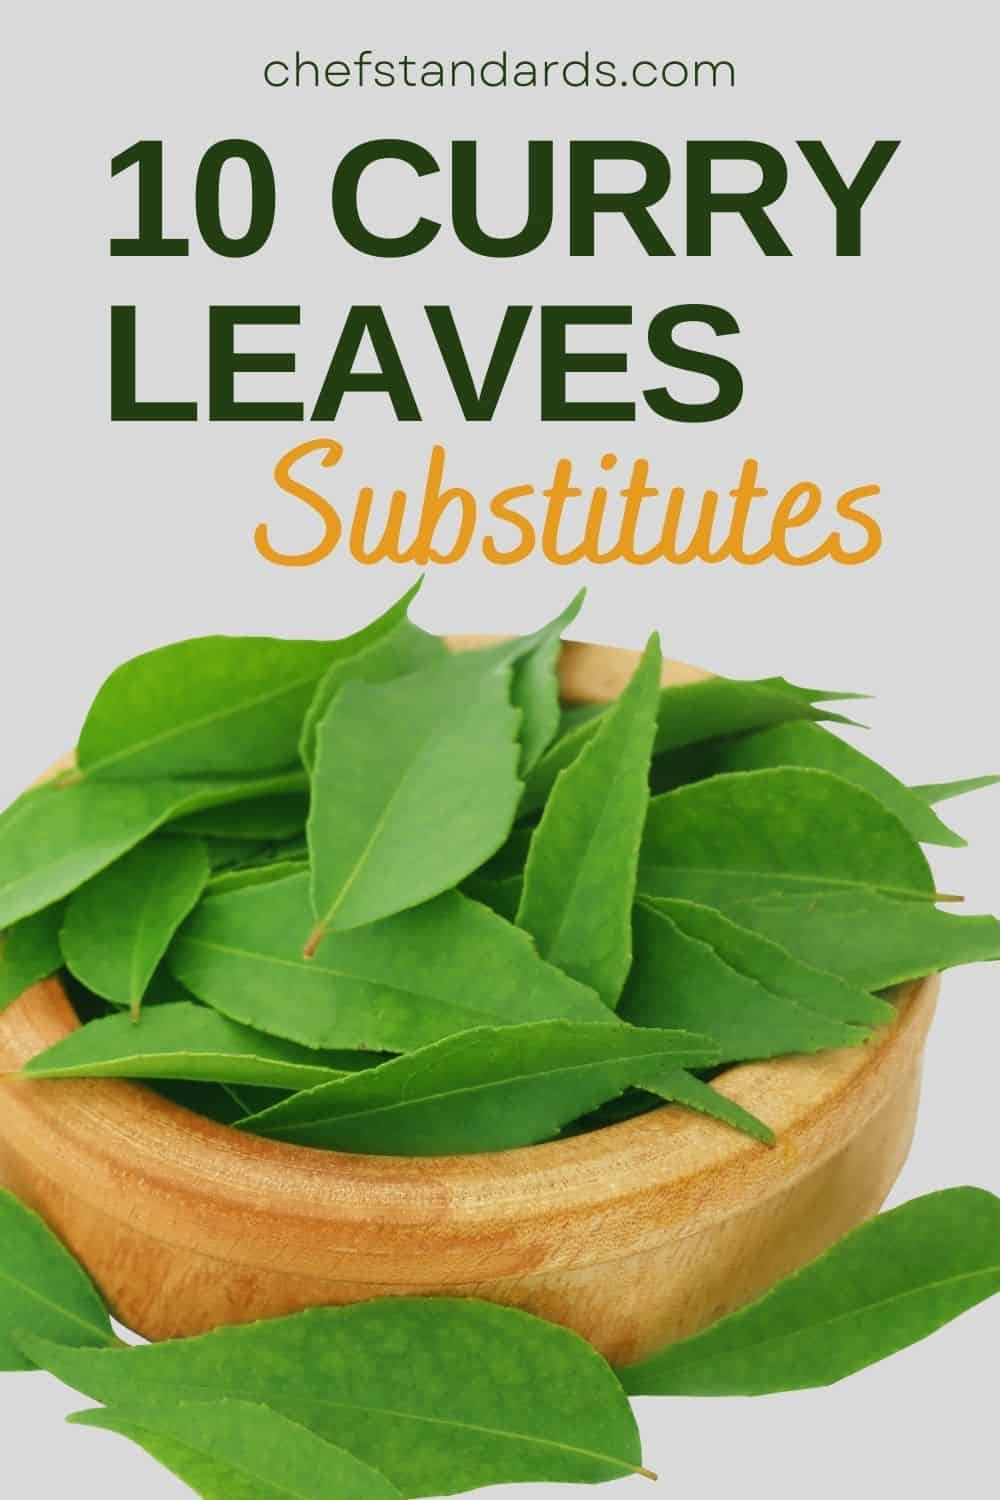 10 Curry Leaves Substitutes To Solve Your Leaf Shortage